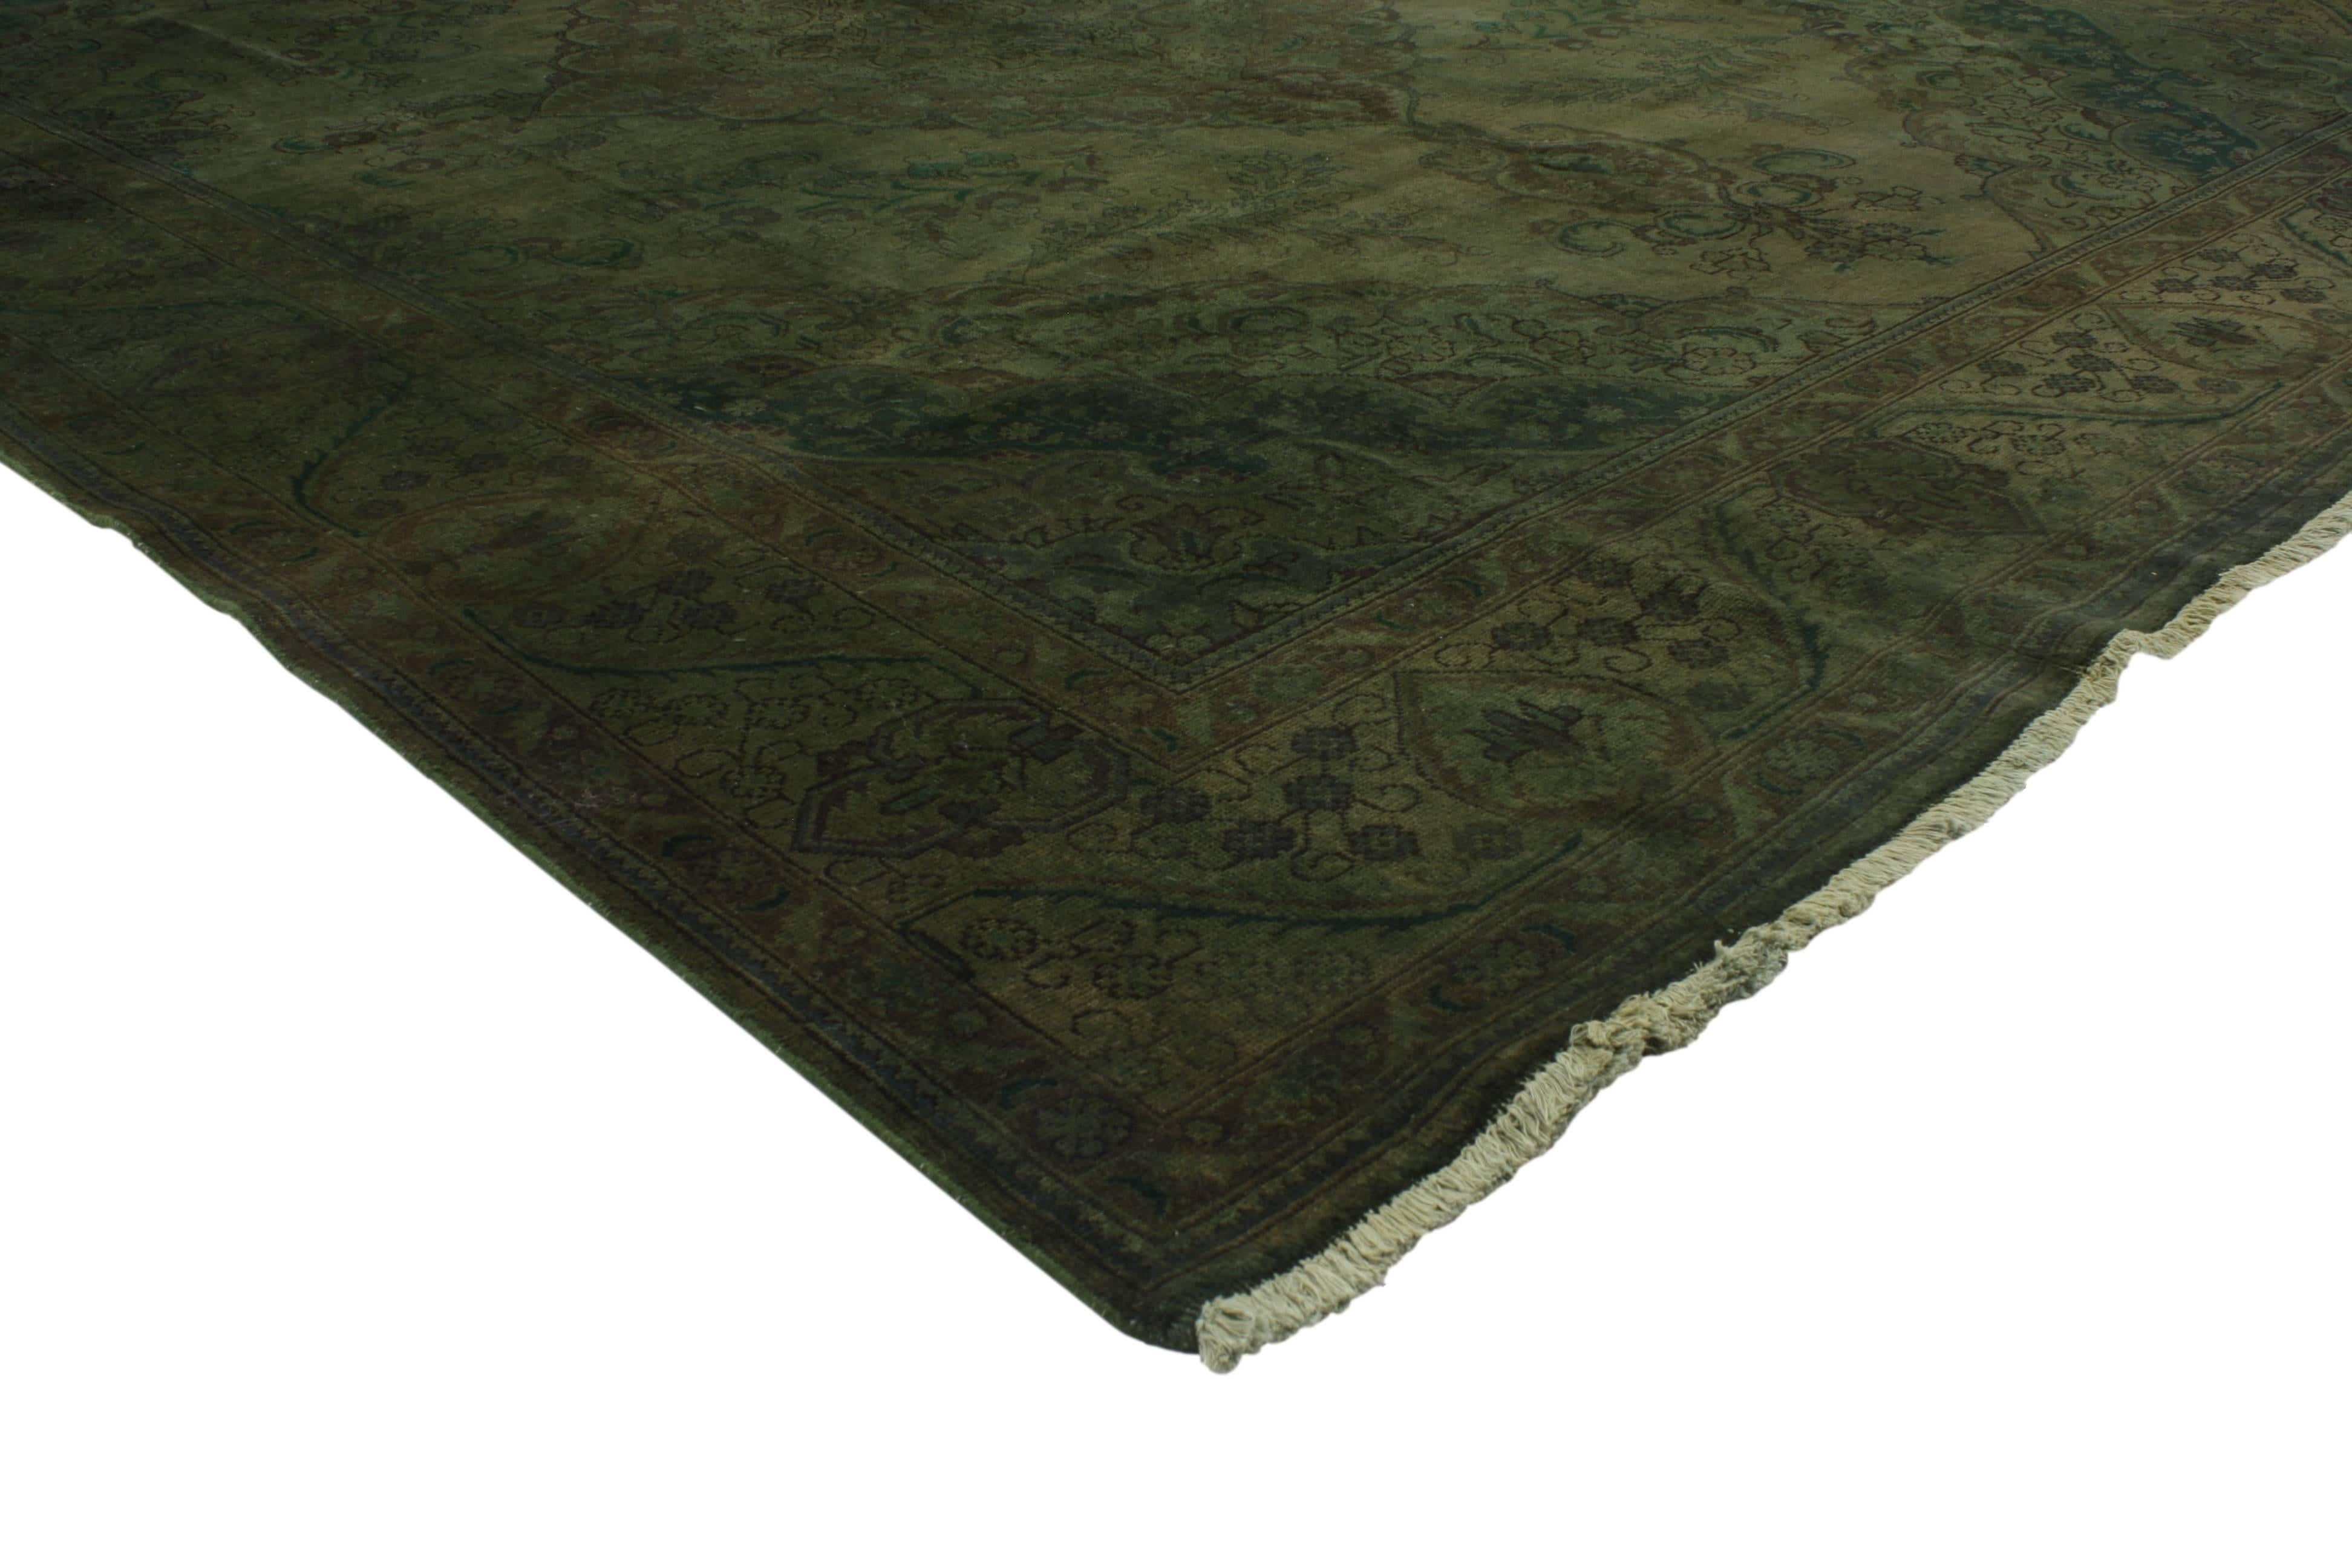 This modern style vintage Persian Tabriz overdyed green rug features an intricate diamond centre medallion surrounded by a complementary border. Saturated in green with variegated shades bring a refined presence when combined with its impeccable and